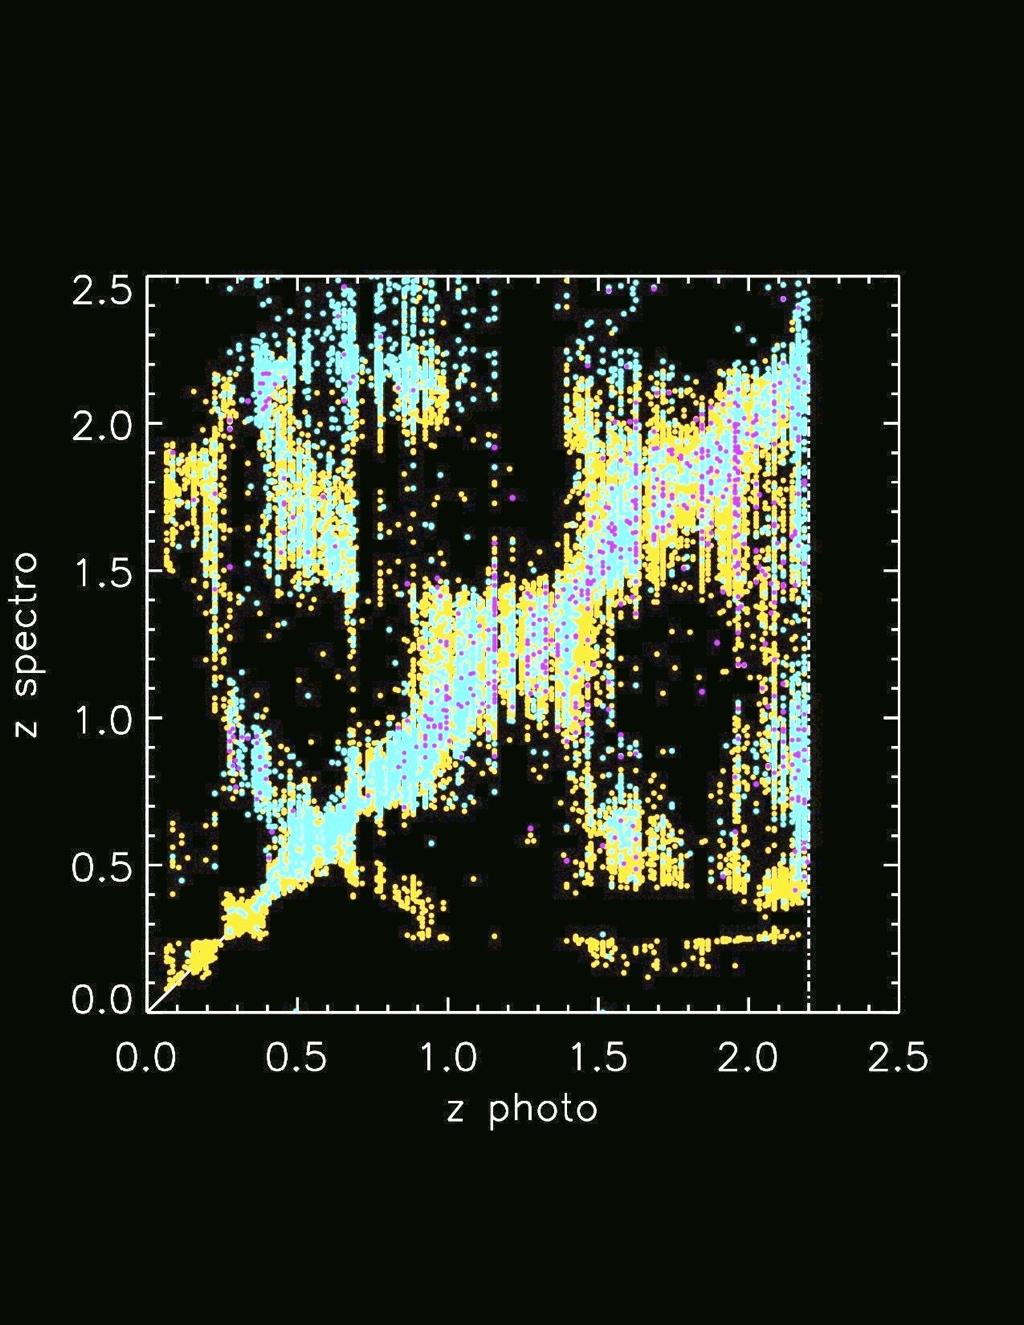 Photometric redshift estimates Cross-matching RQCat with SDSS-DR7, BOSS, and 2SLAQ Quasar photo-z have